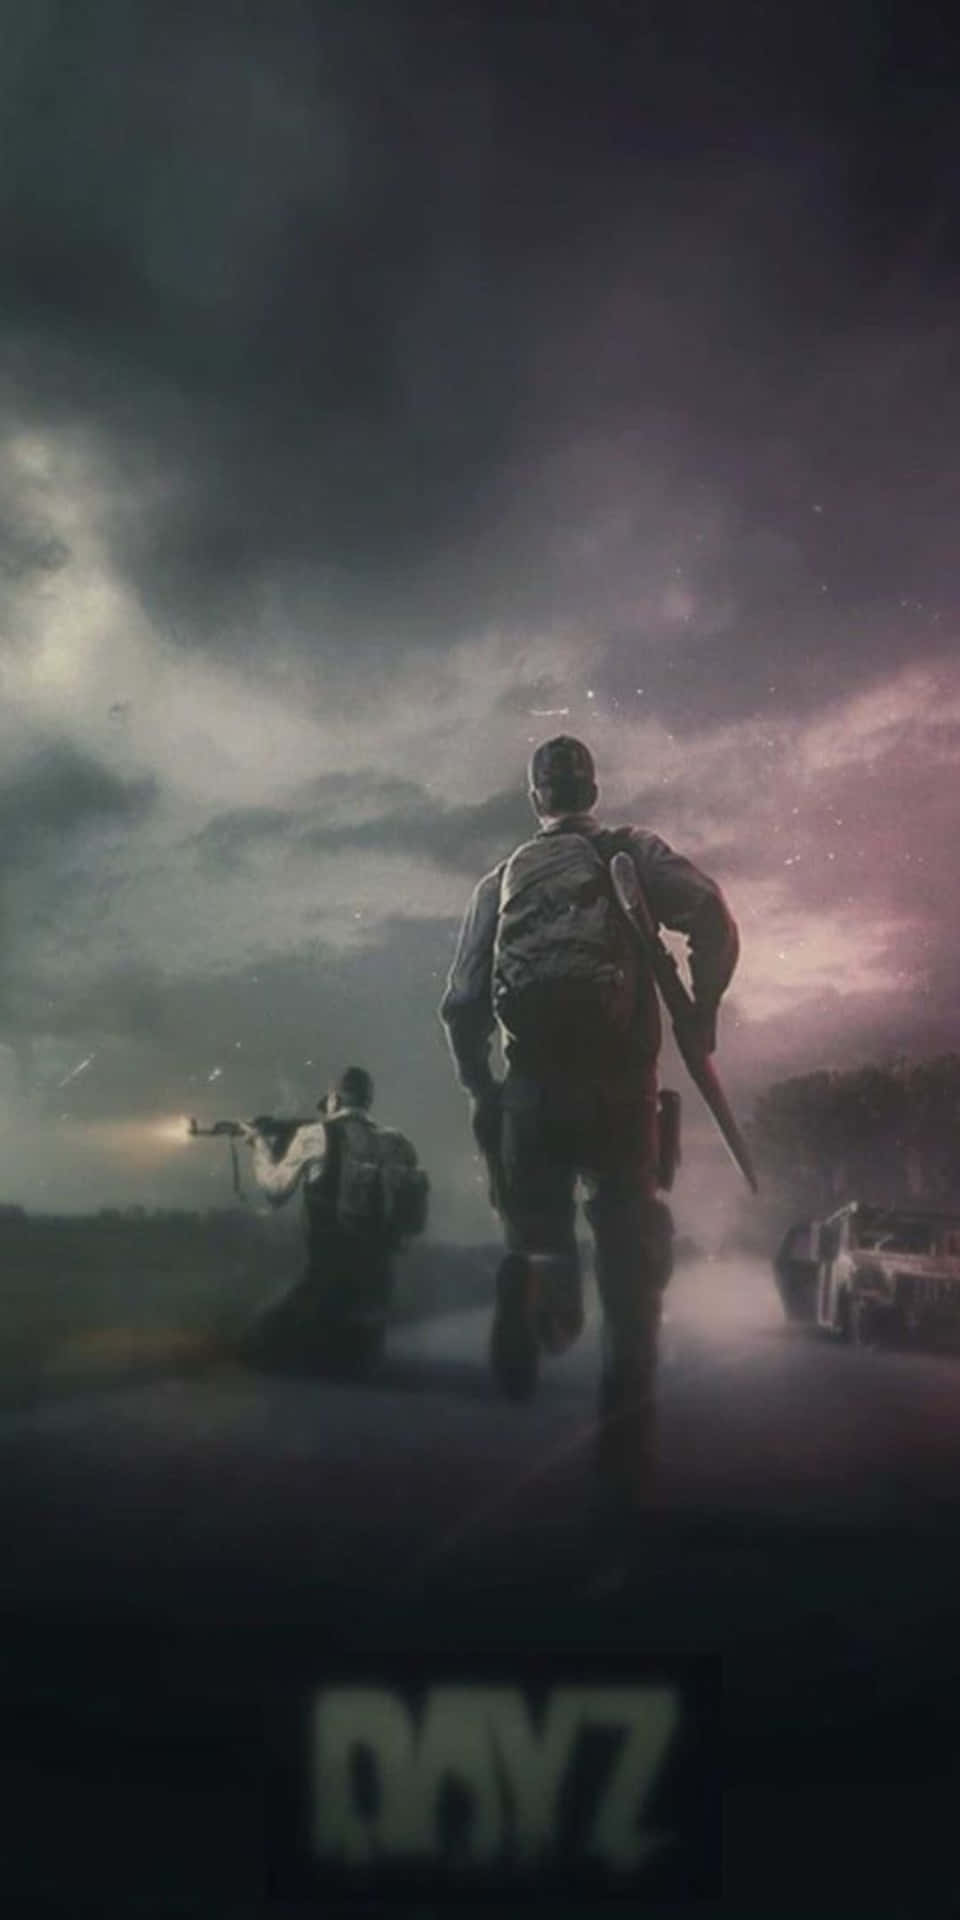 A Poster For Dayz With Soldiers On The Road